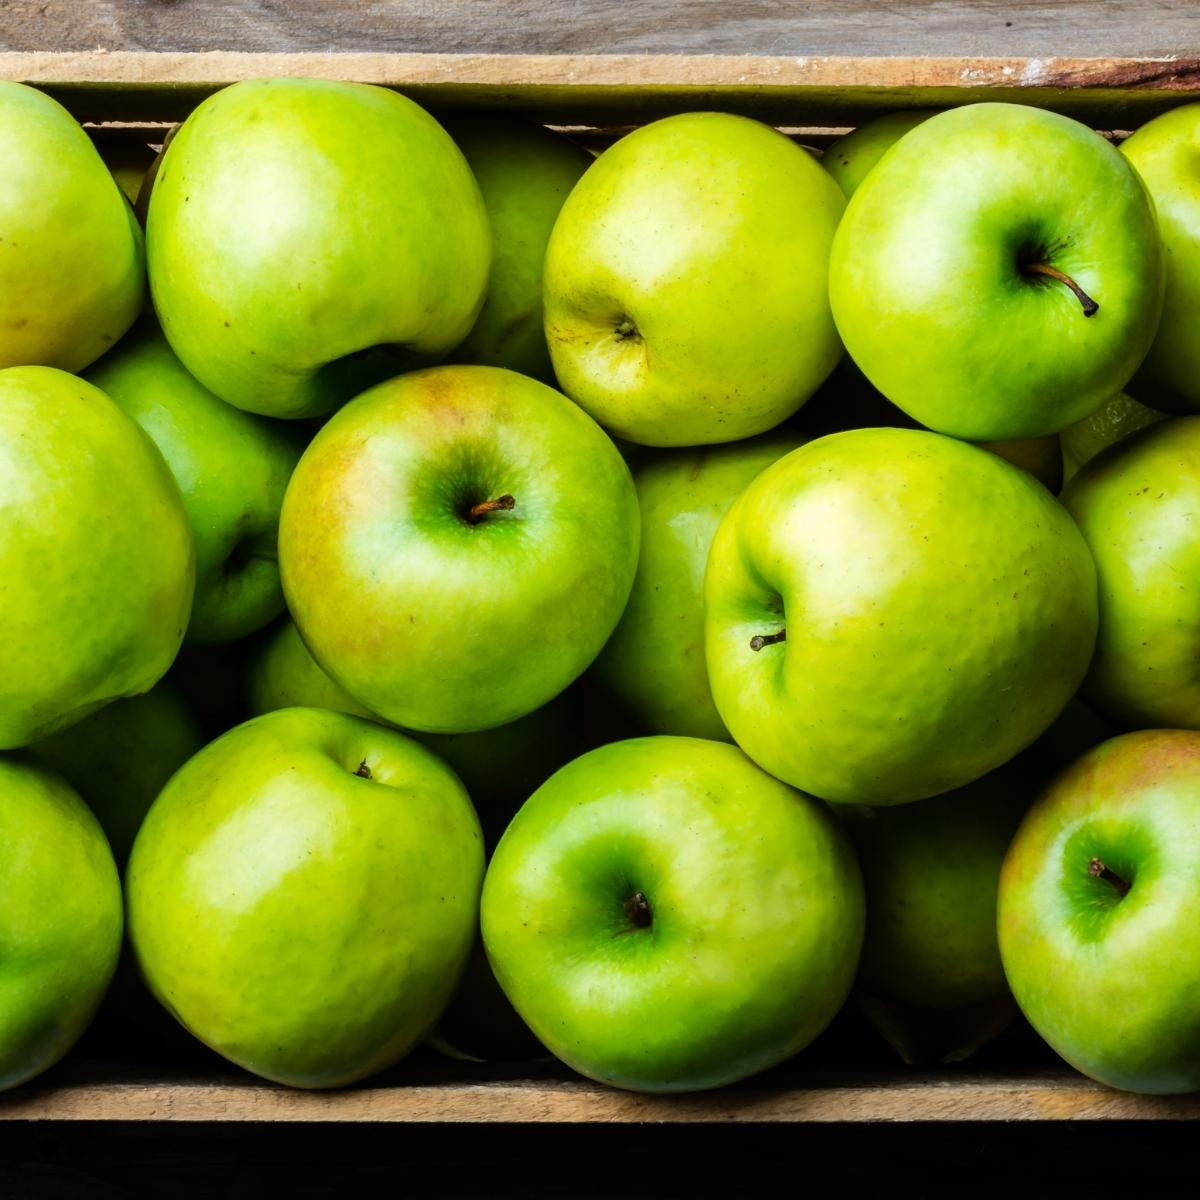 bright green apples in a wooden box.